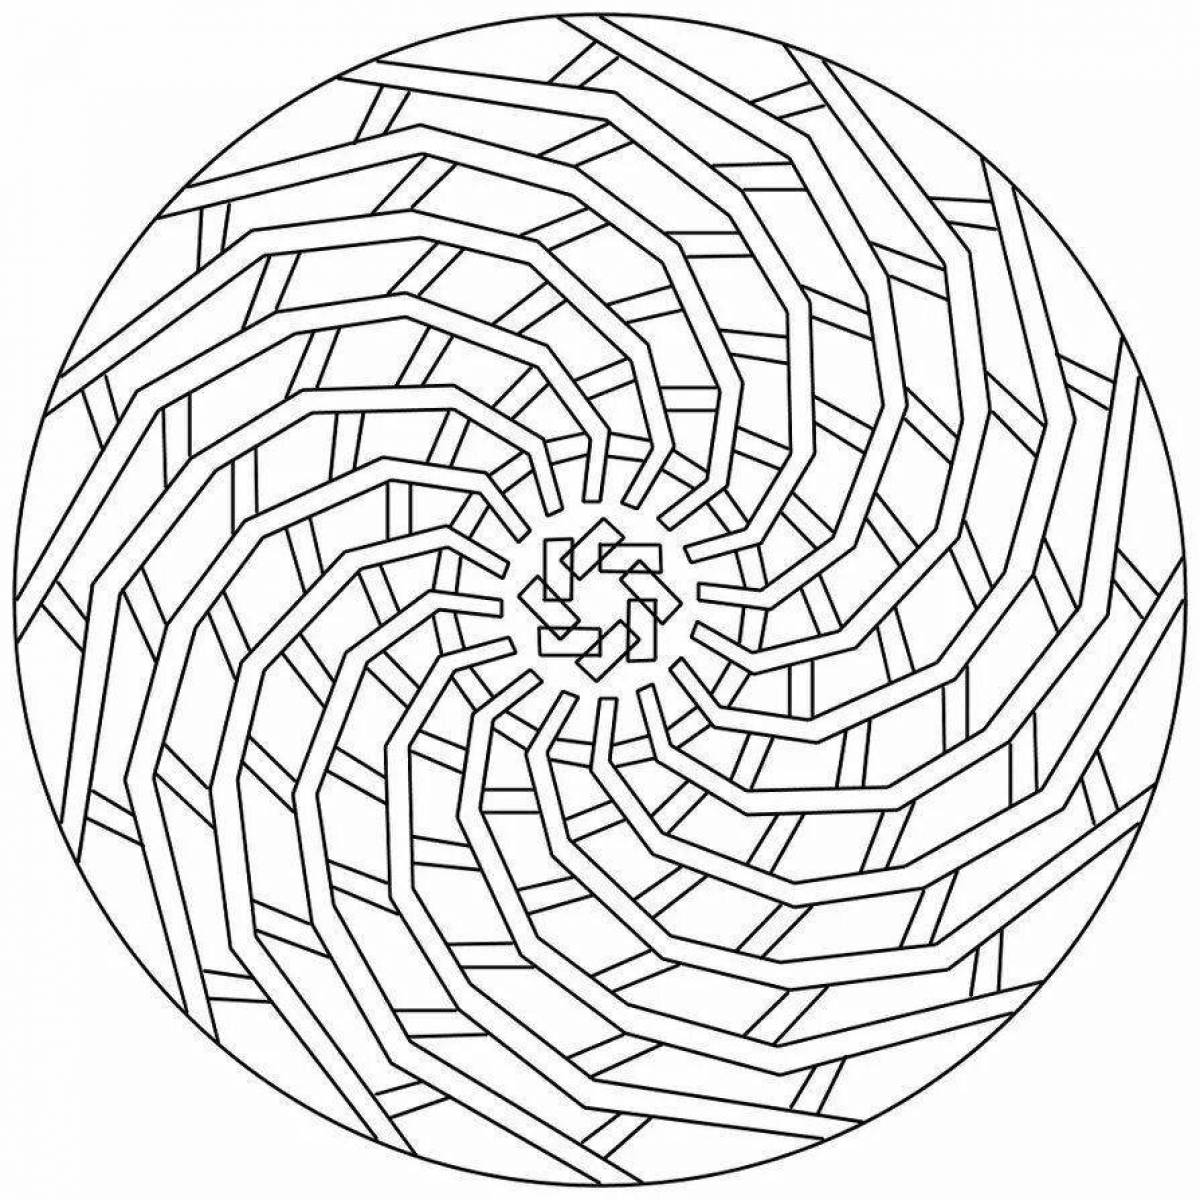 Creative round lines create a coloring book